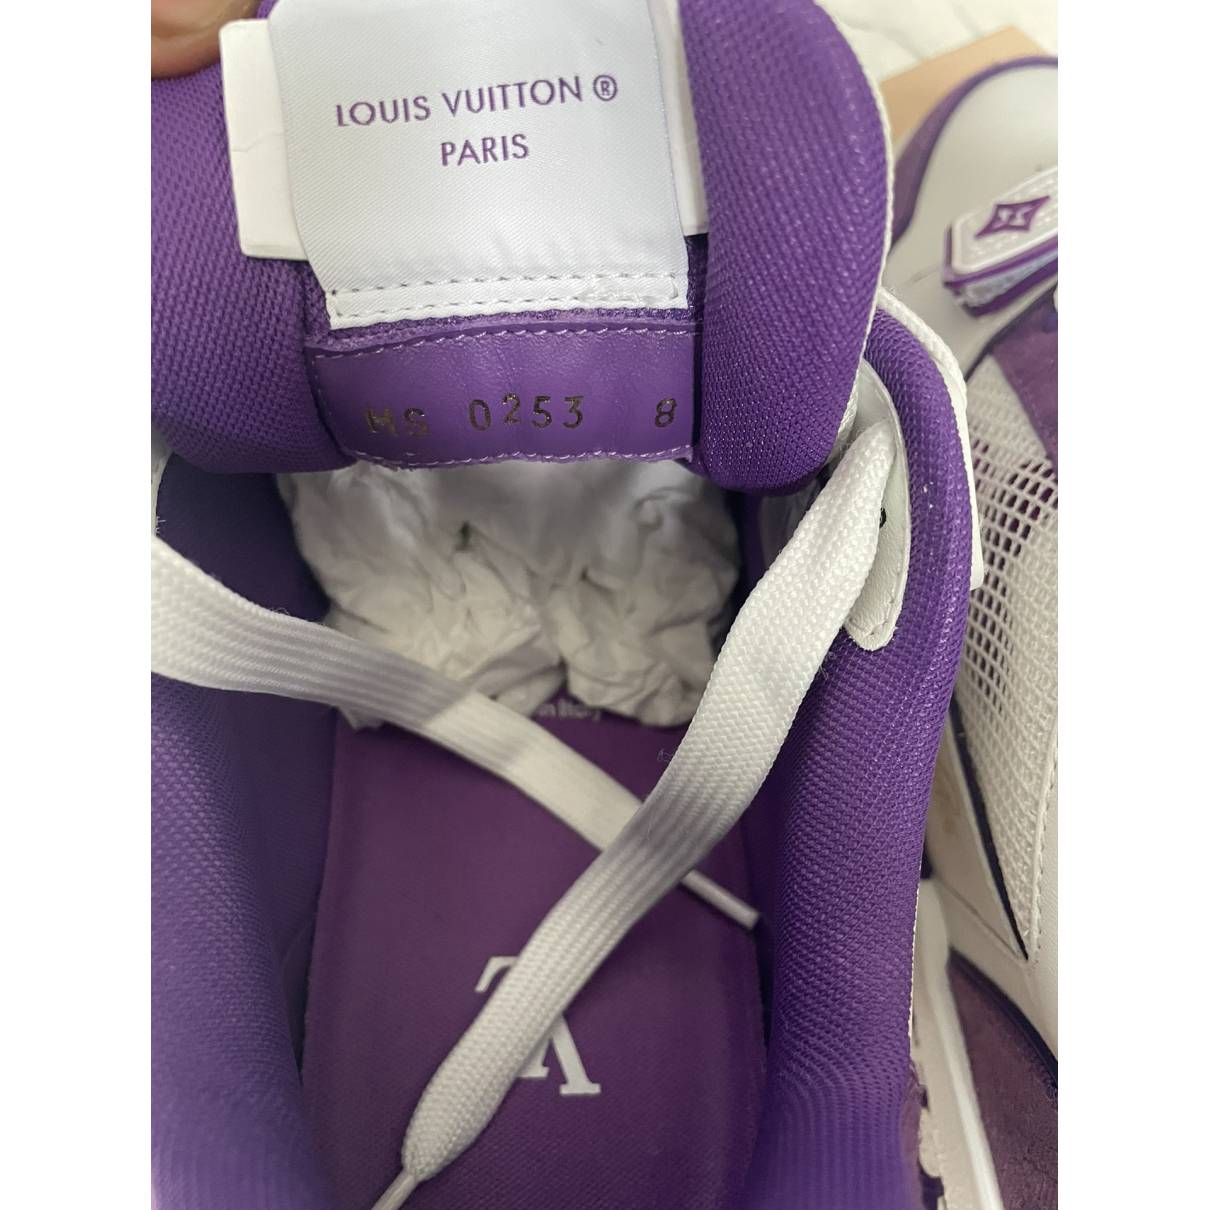 Lv trainer leather low trainers Louis Vuitton Purple size 6 UK in